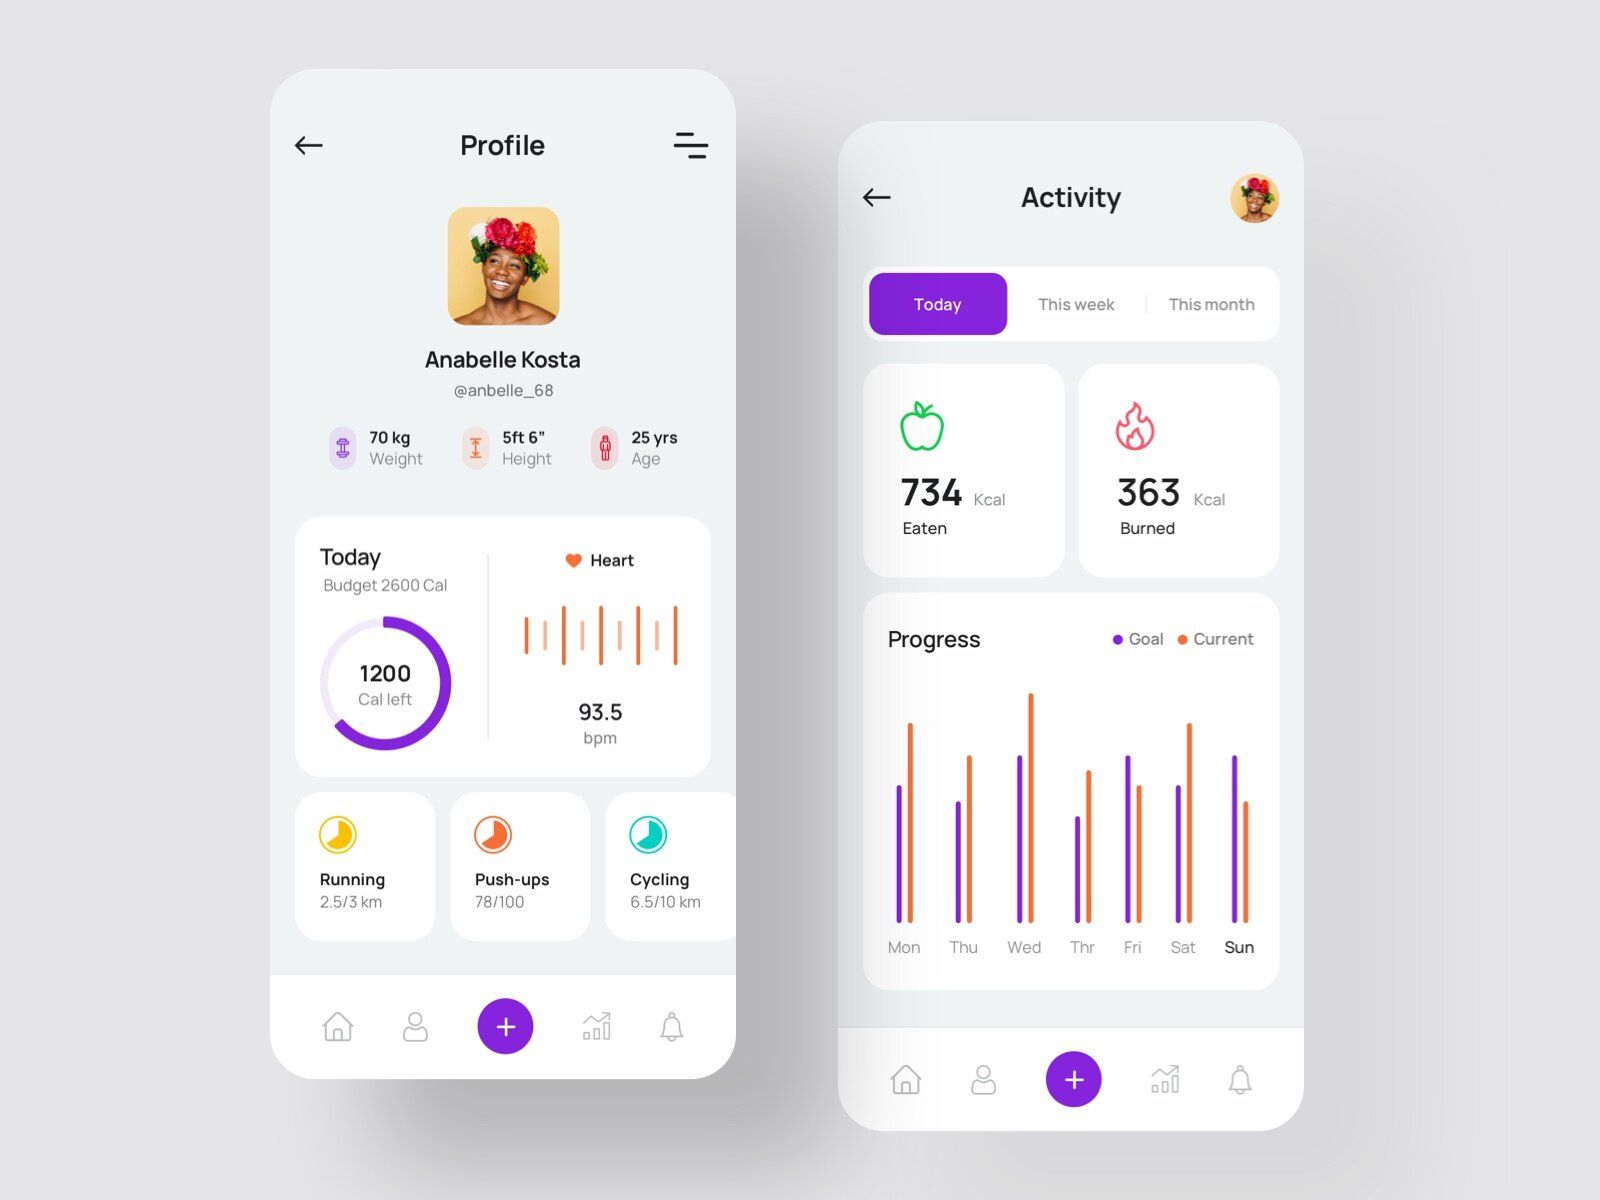 Progress tracking in a fitness app (*image by [Ahmed Manna](https://dribbble.com/ahmed_manna){ rel="nofollow" .default-md}*)